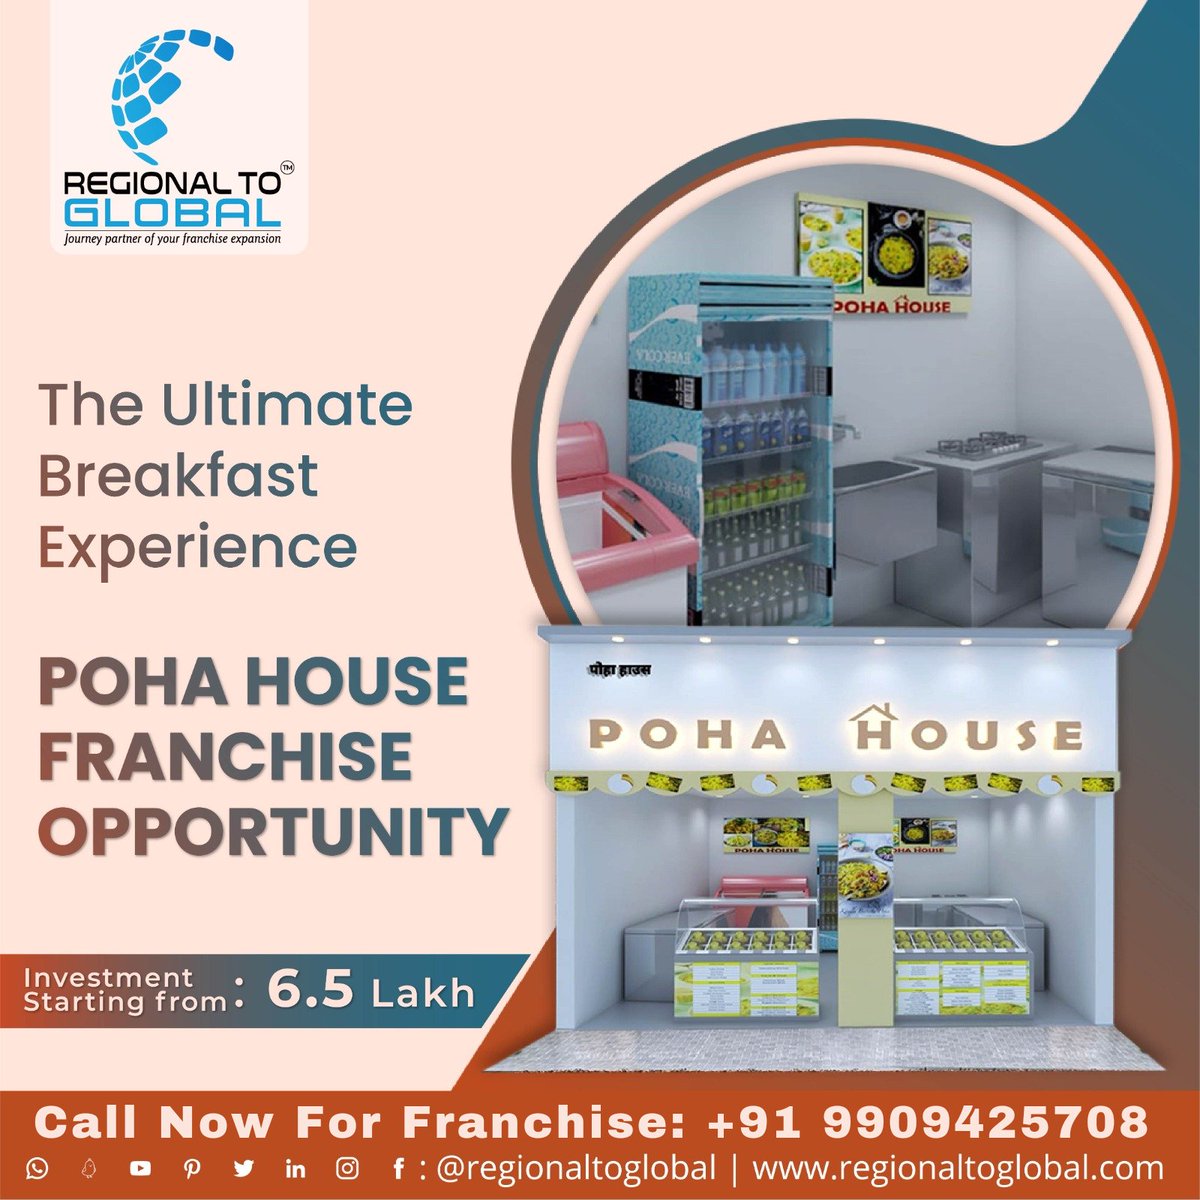 #franchiseopportunities #pohahouse #pohahousefranchise #poha #FranchiseWithUs  #JoinUsNow #lowinvestmentbusiness #breakfastdream #BuildYourFuture #startyourdayright #freshopportunity #breakfastbusiness #joinourfranchiseteam #Ultimate #greatopportunity